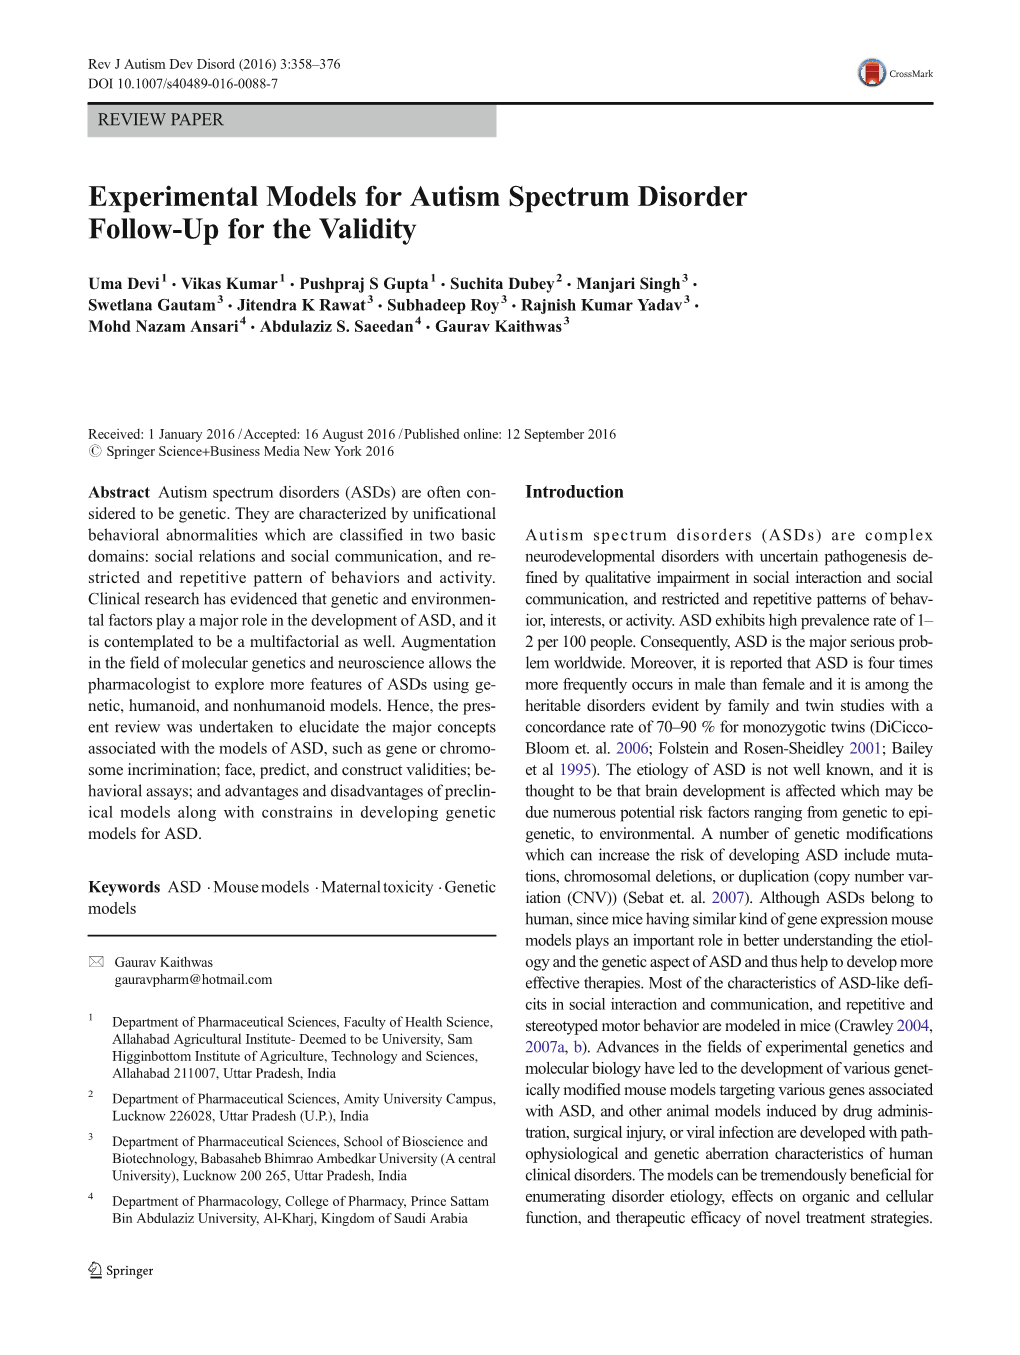 Experimental Models for Autism Spectrum Disorder Follow-Up for the Validity